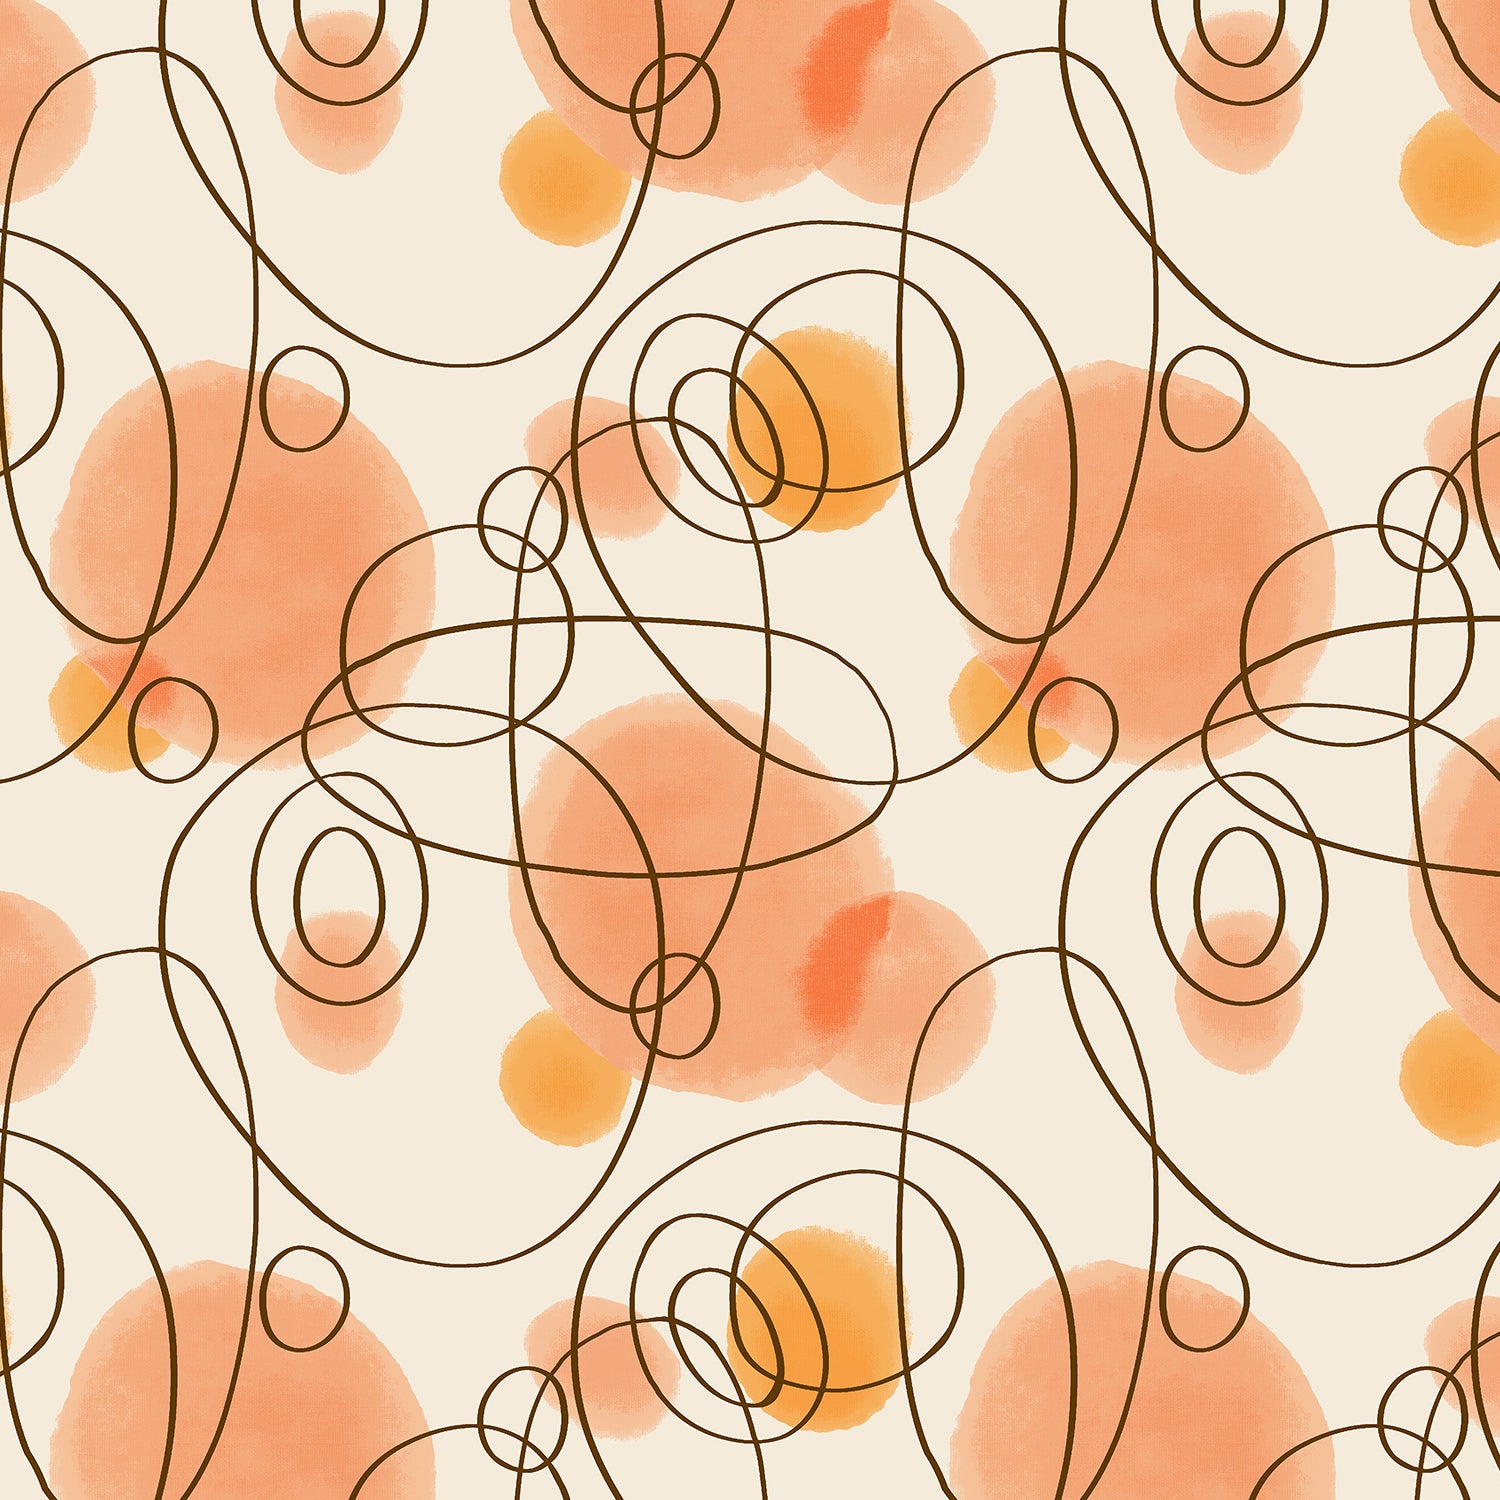 Wide Open Spaces Quilt Fabric - Daydream in Coral Orange - RJ3403-CO2